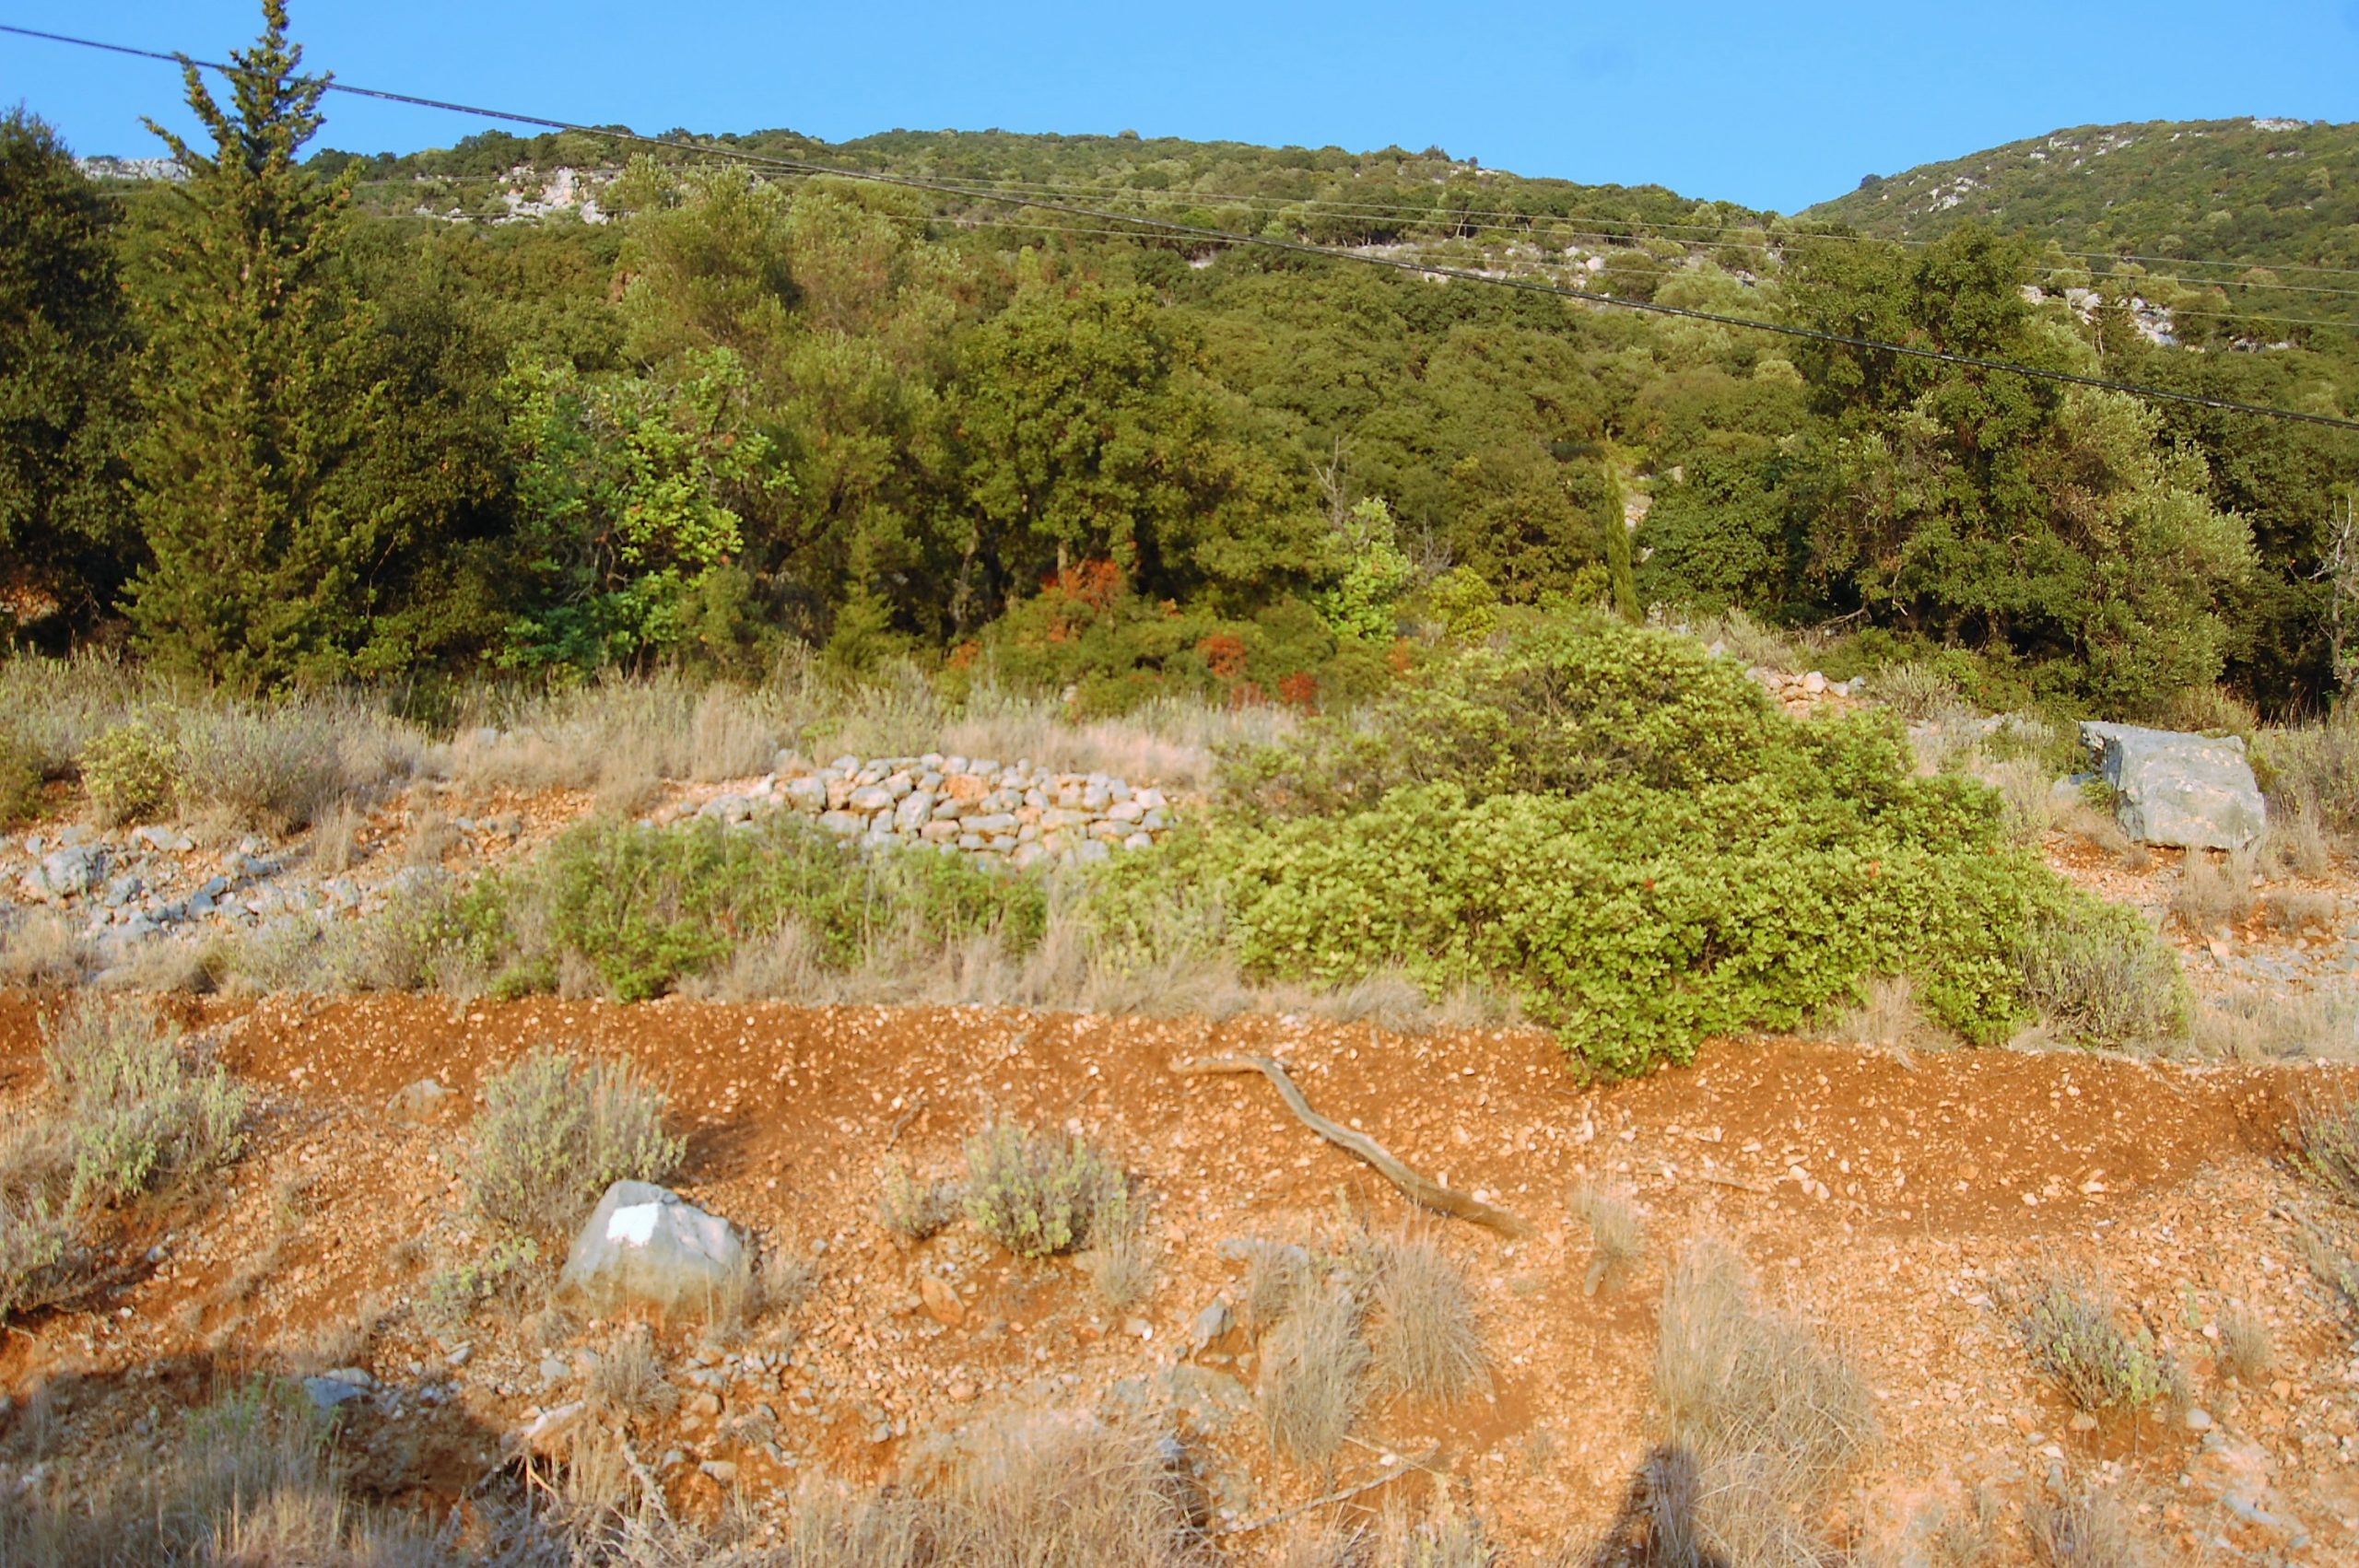 Terrain and landscape of land for sale Ithaca Greece, Lefki